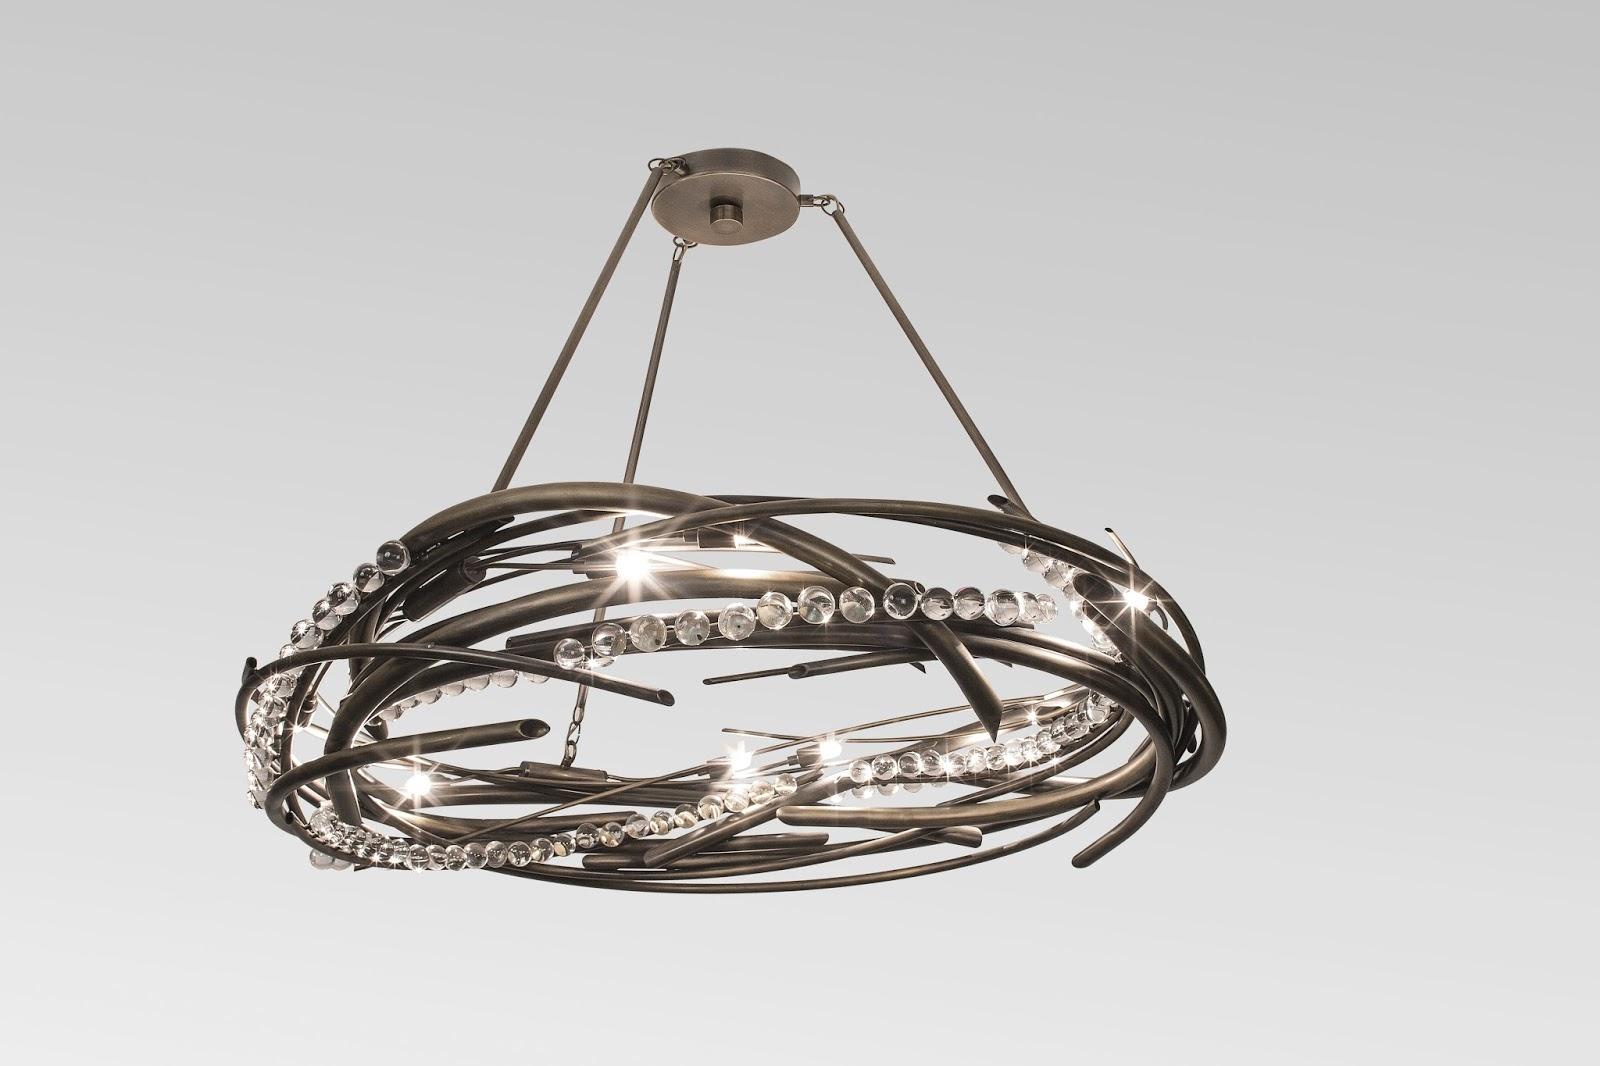 The circular motion of this highly sculptured chandelier represents the movement of an object along a circular path. The non-uniform changing rate of rotation describes the shape of the chandelier with its crystal bundles attached by the result of